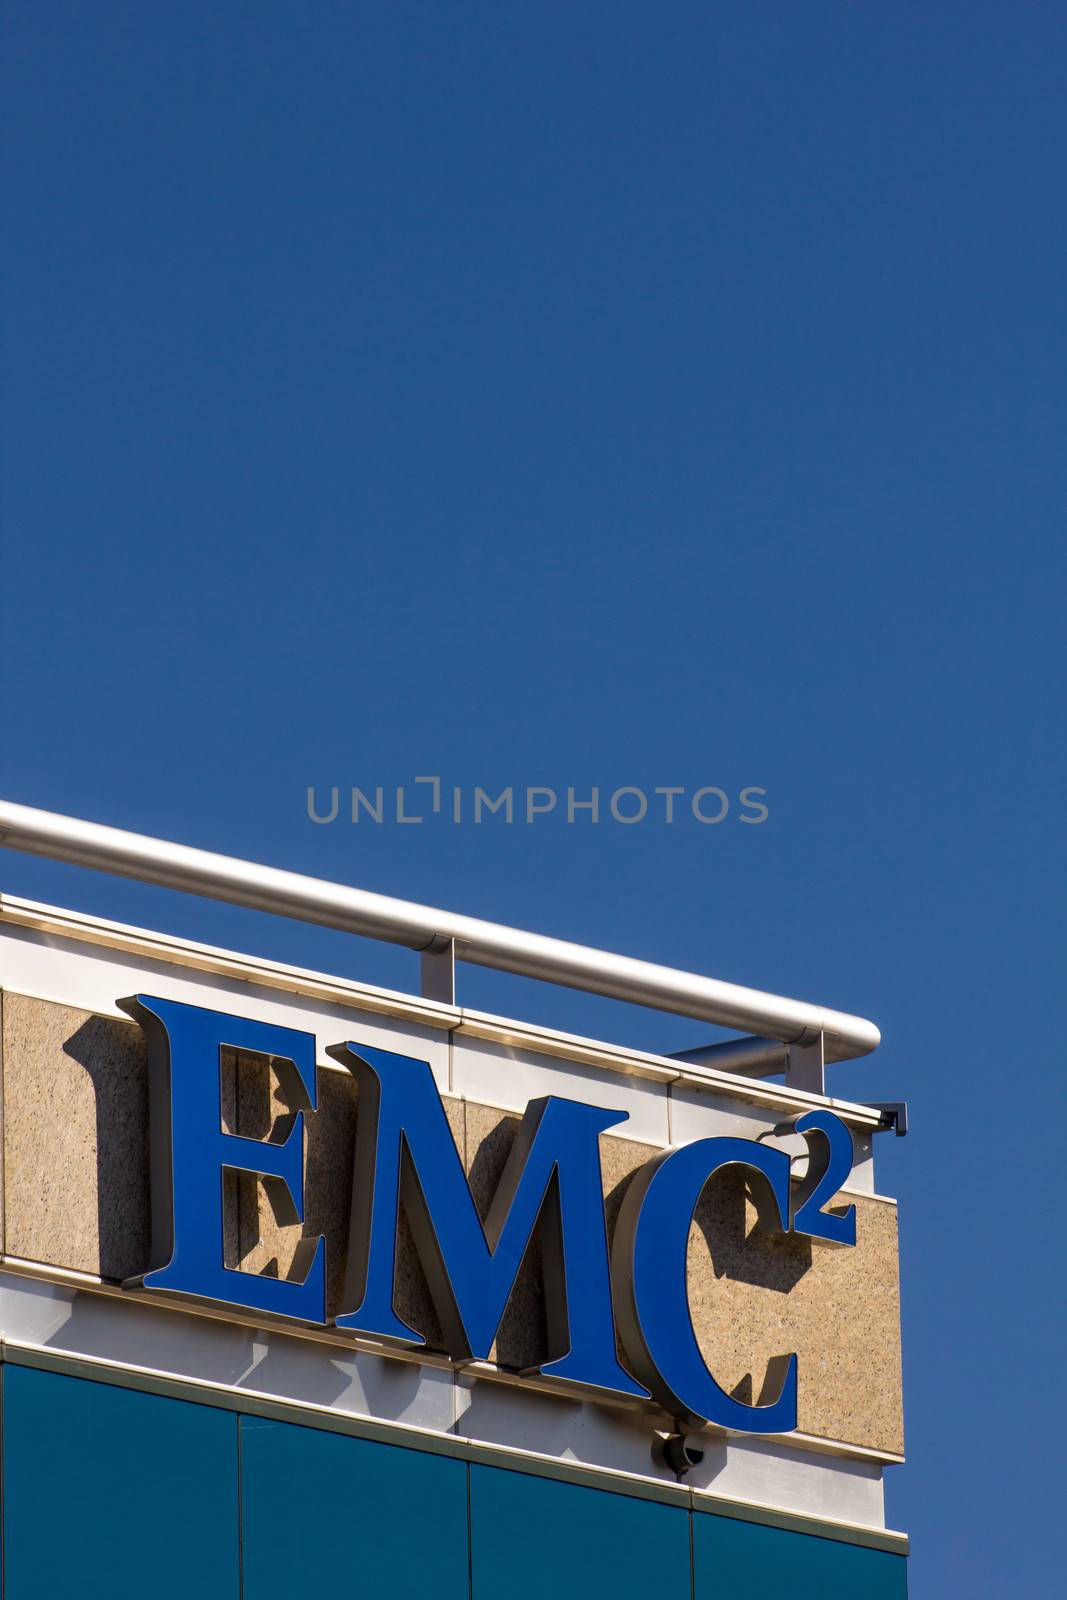 EMC Building by wolterk